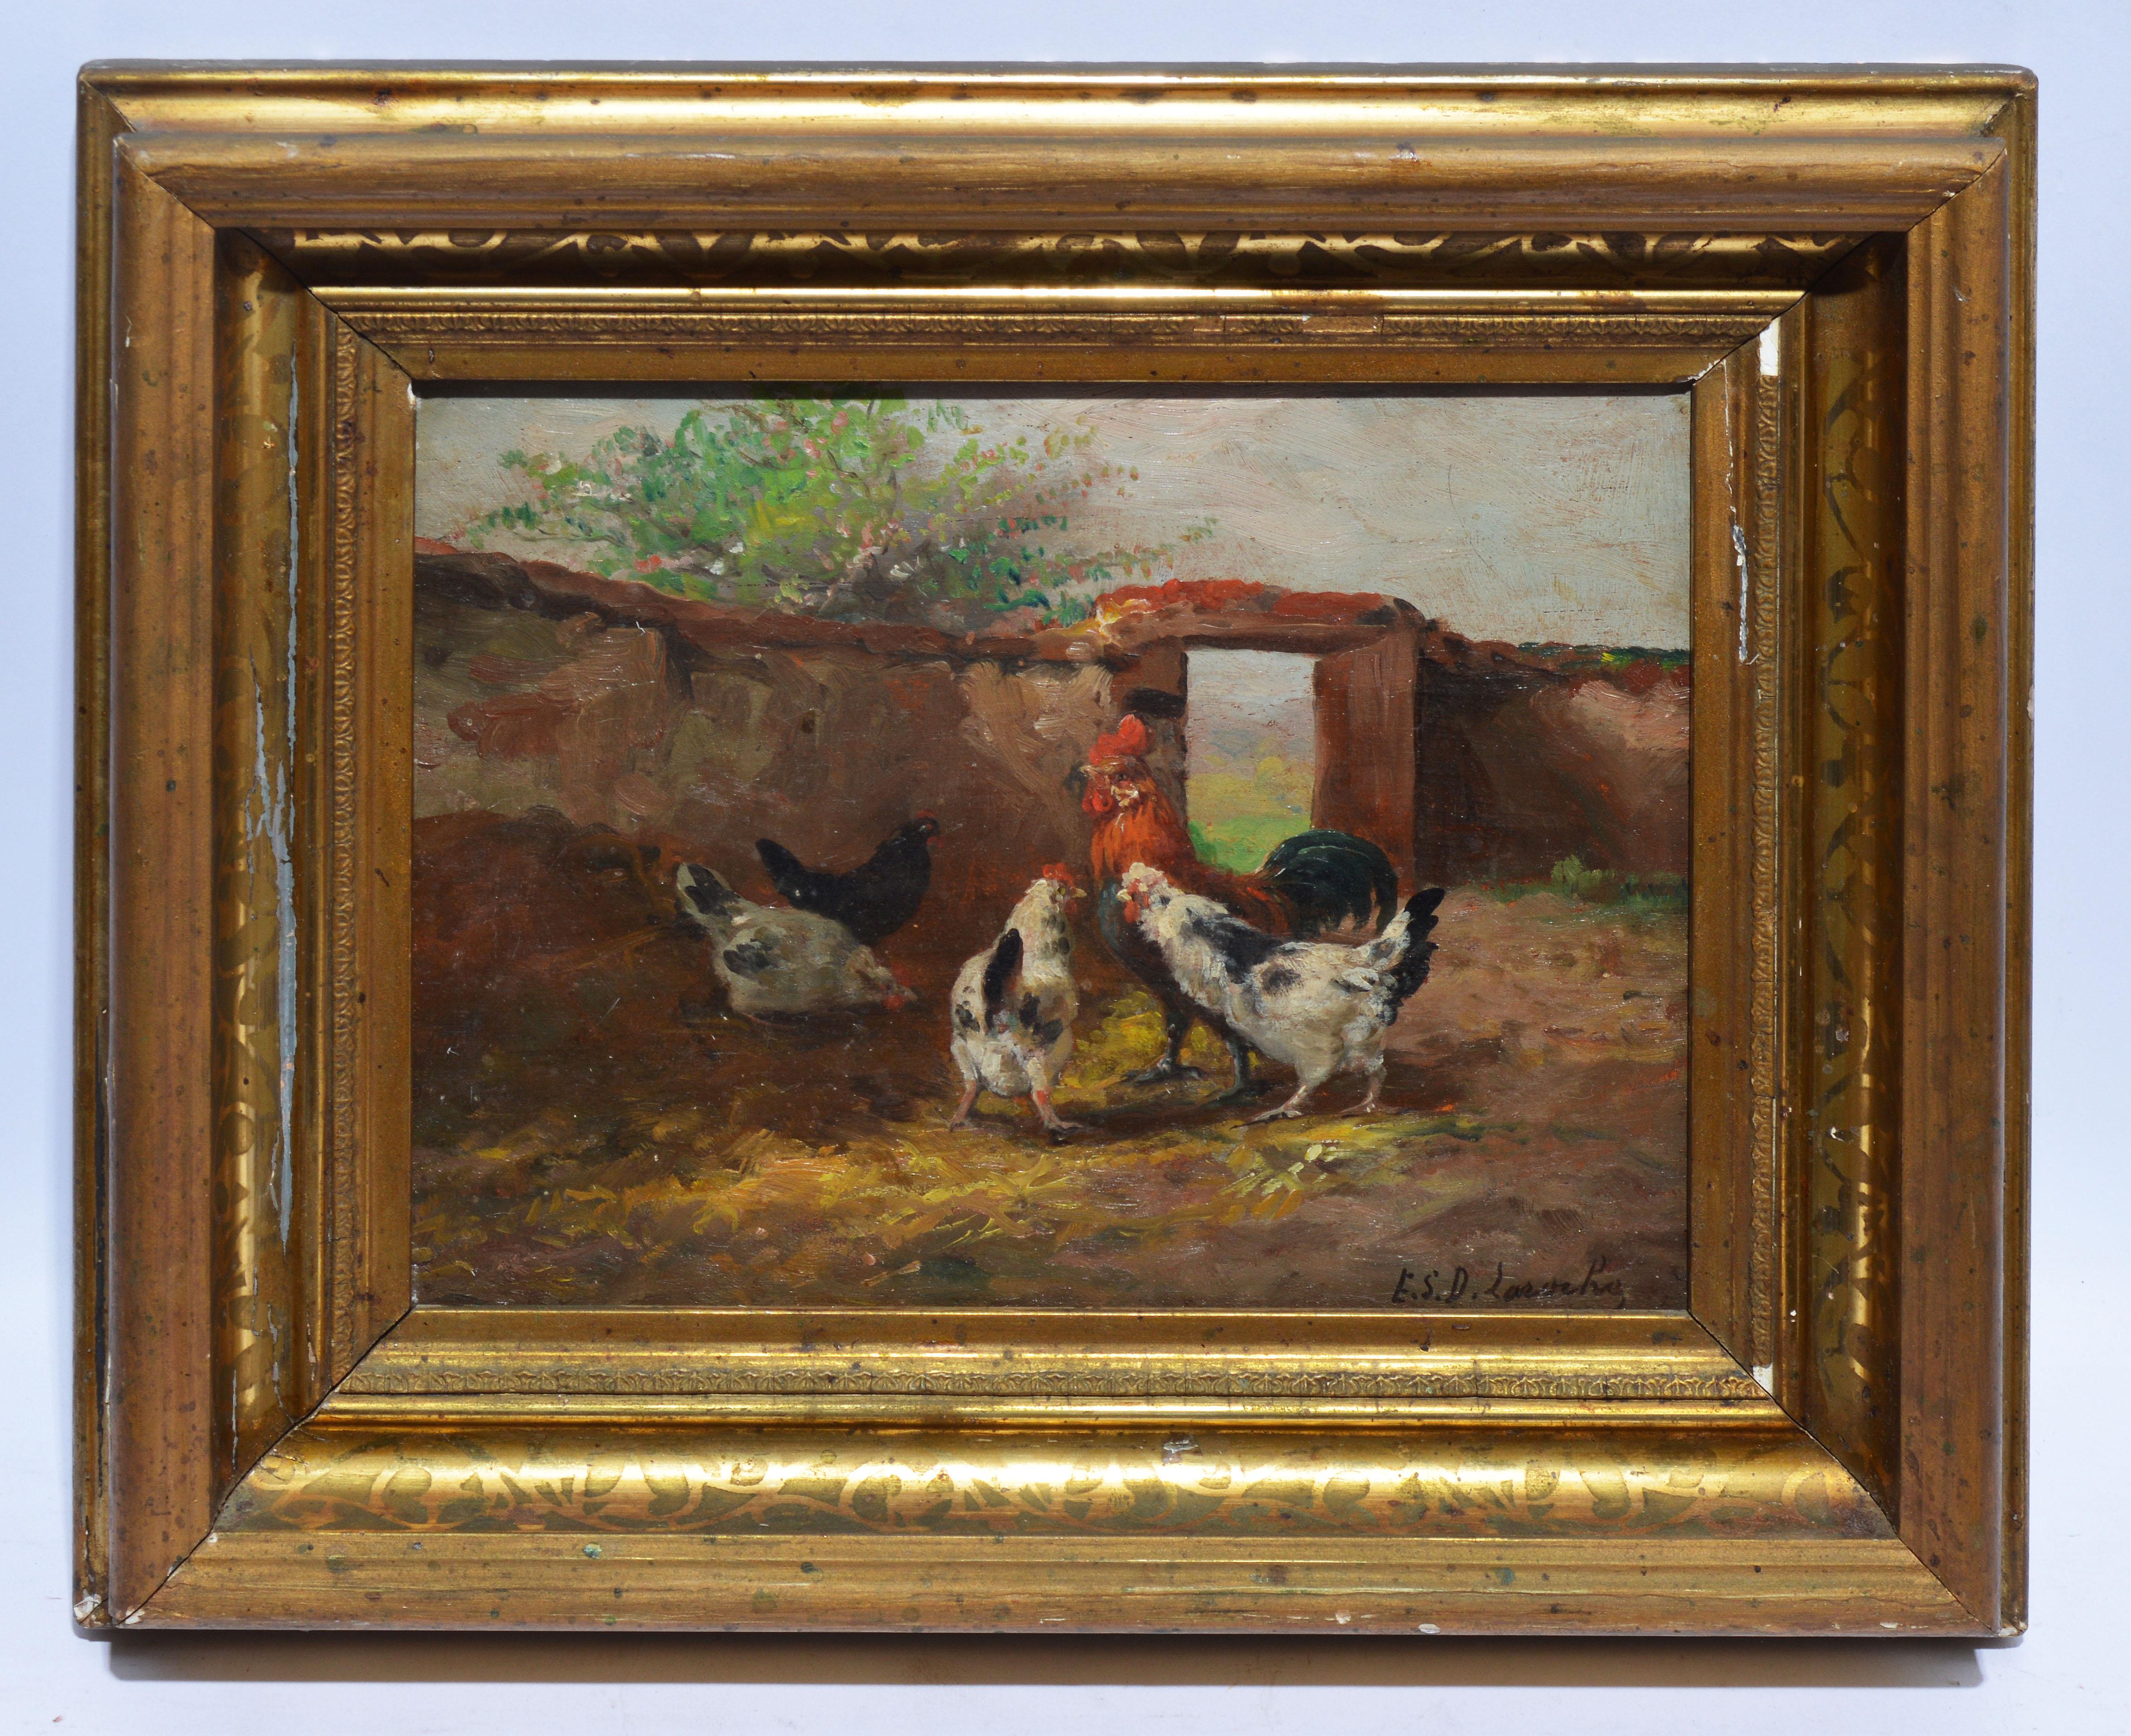 Antique American School View of a Roosters, 19th Century Signed Oil Painting - Brown Landscape Painting by Unknown